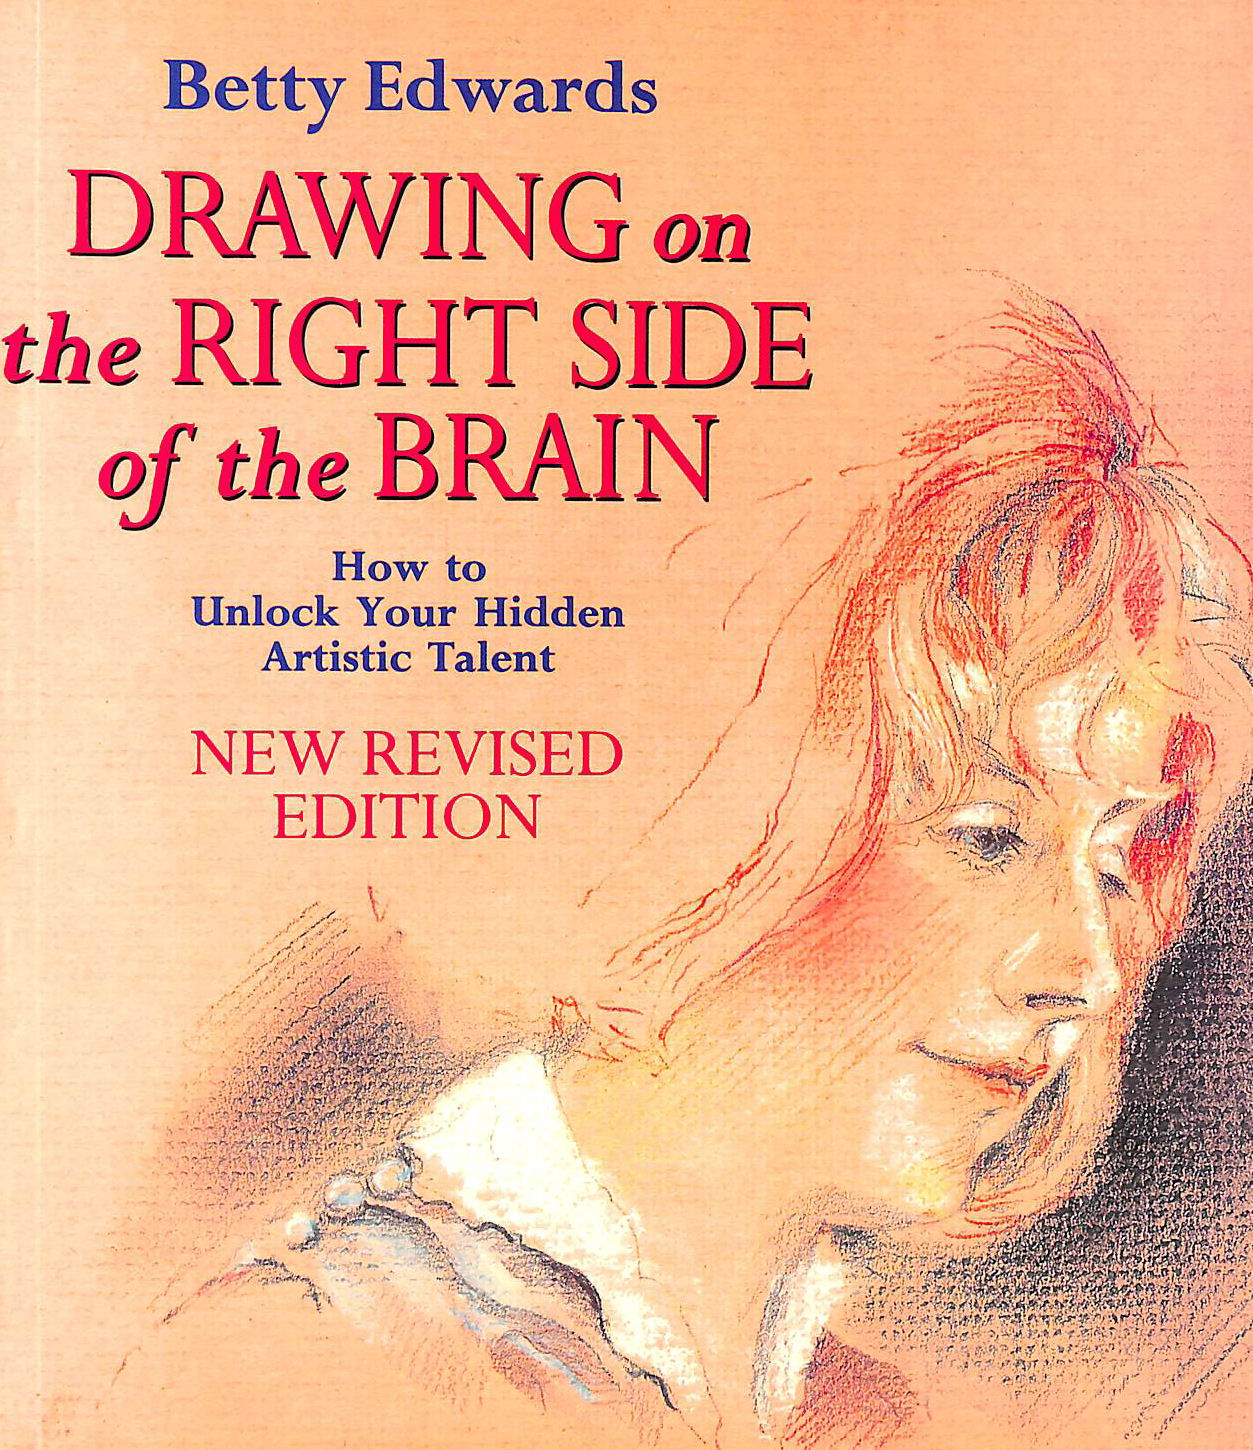 EDWARDS, BETTY - Drawing on the Right Side of the Brain